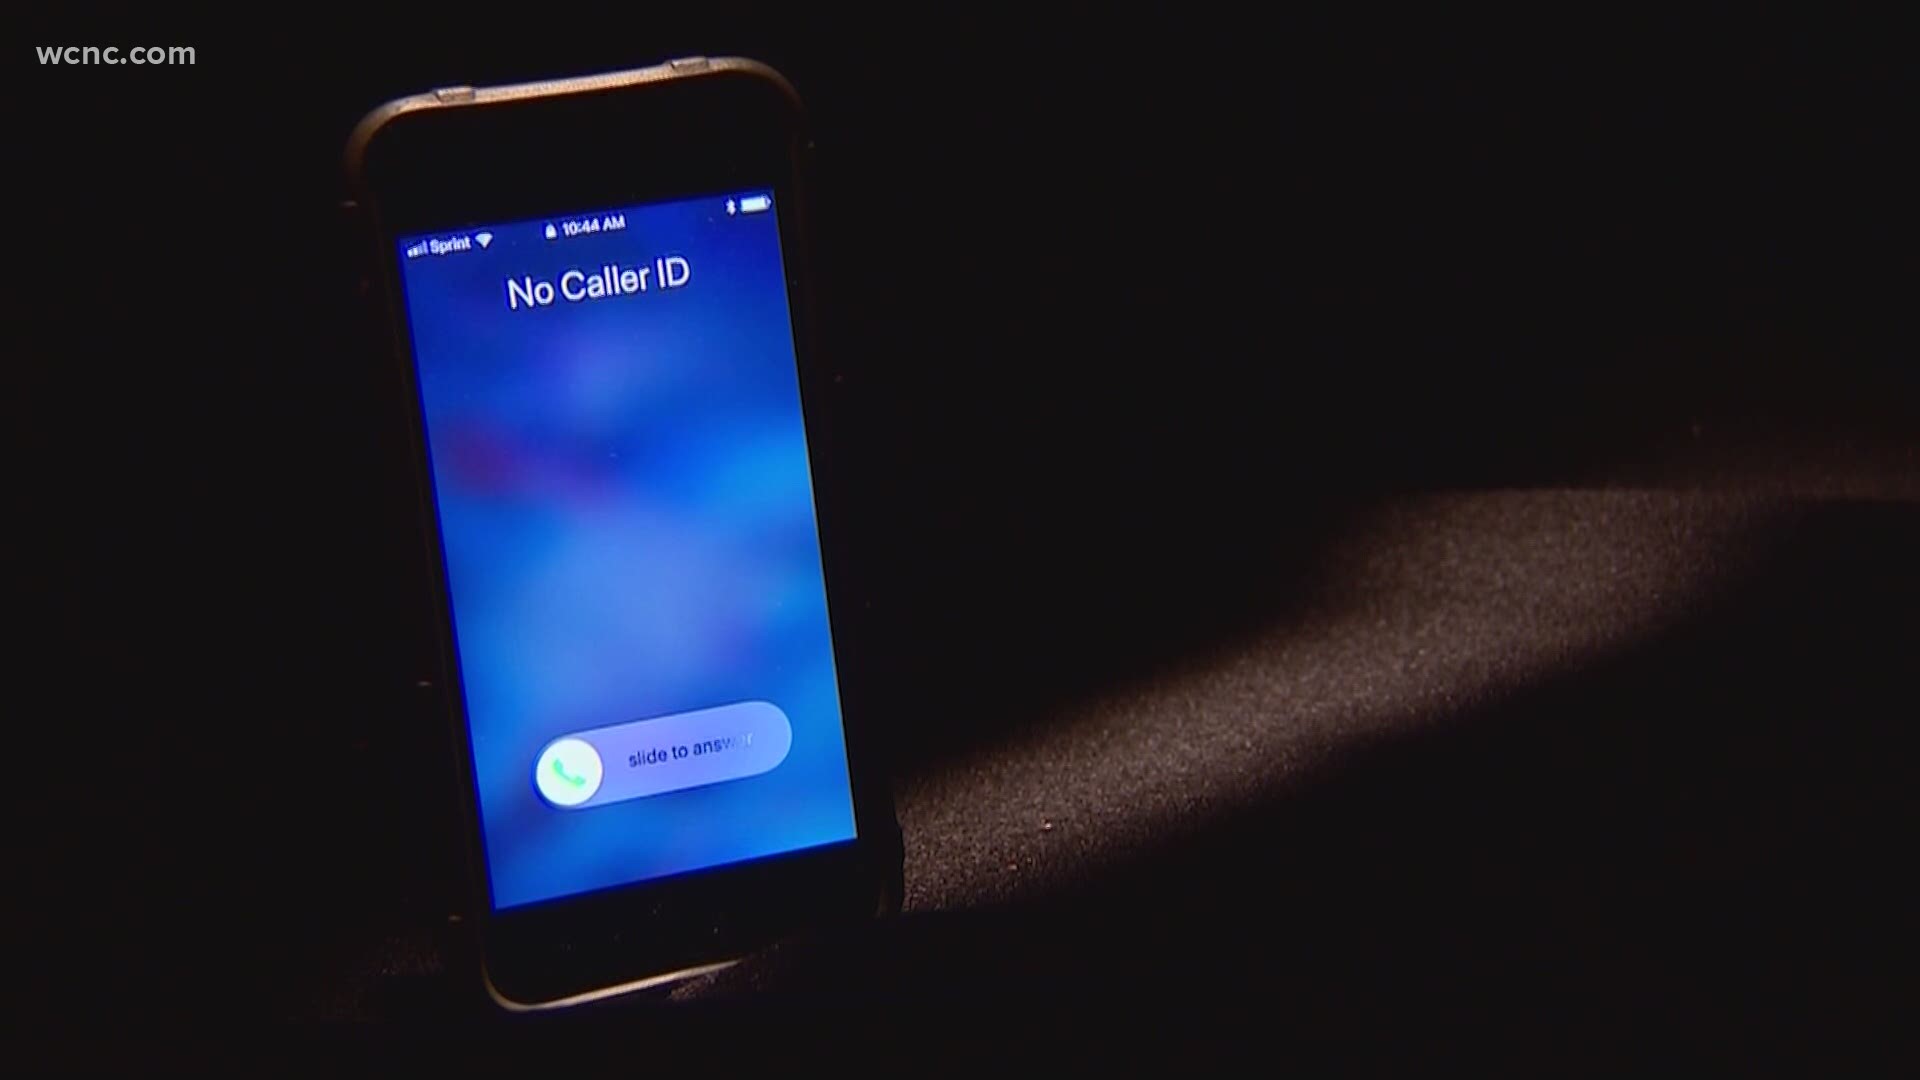 The Federal Trade Commission said robocalls can be reported at donotcall.gov.